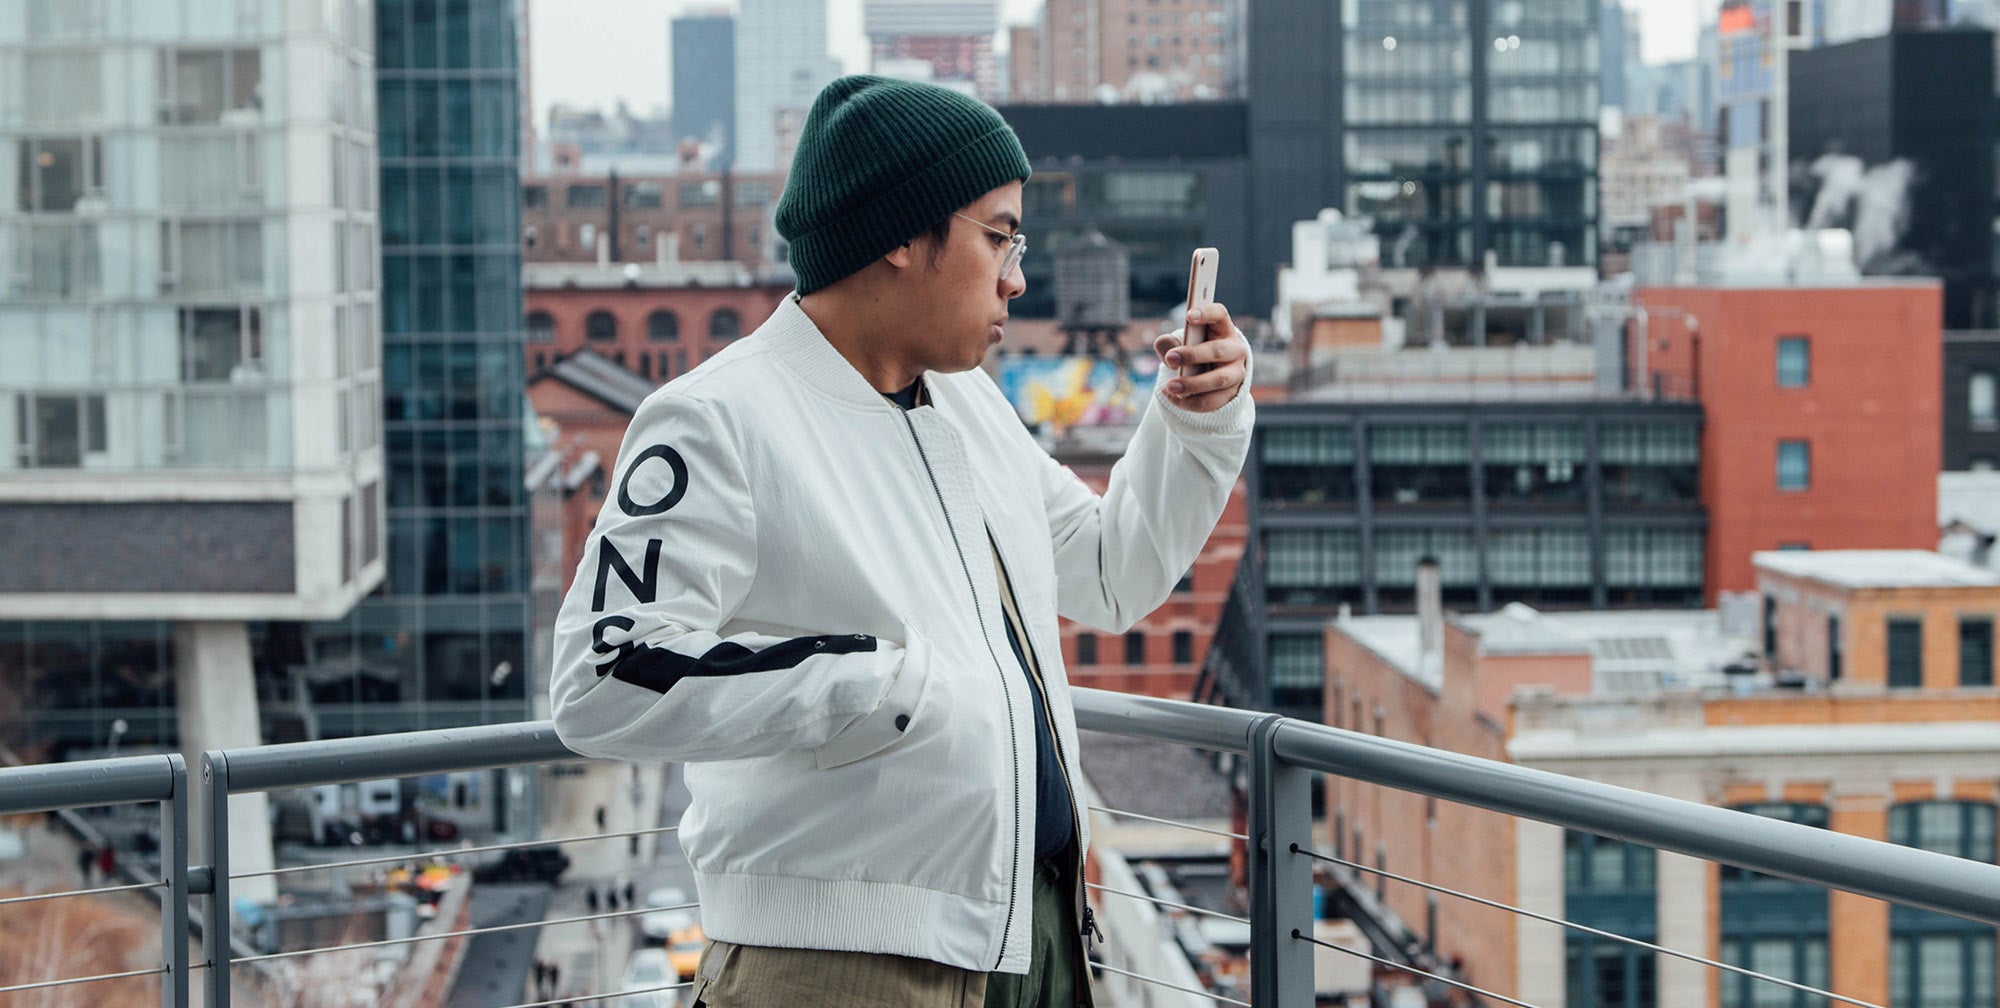 Highsnobiety Editorial Director Jian DeLeon for A Day in The Life Series - ONS Clothing Urban Transplants